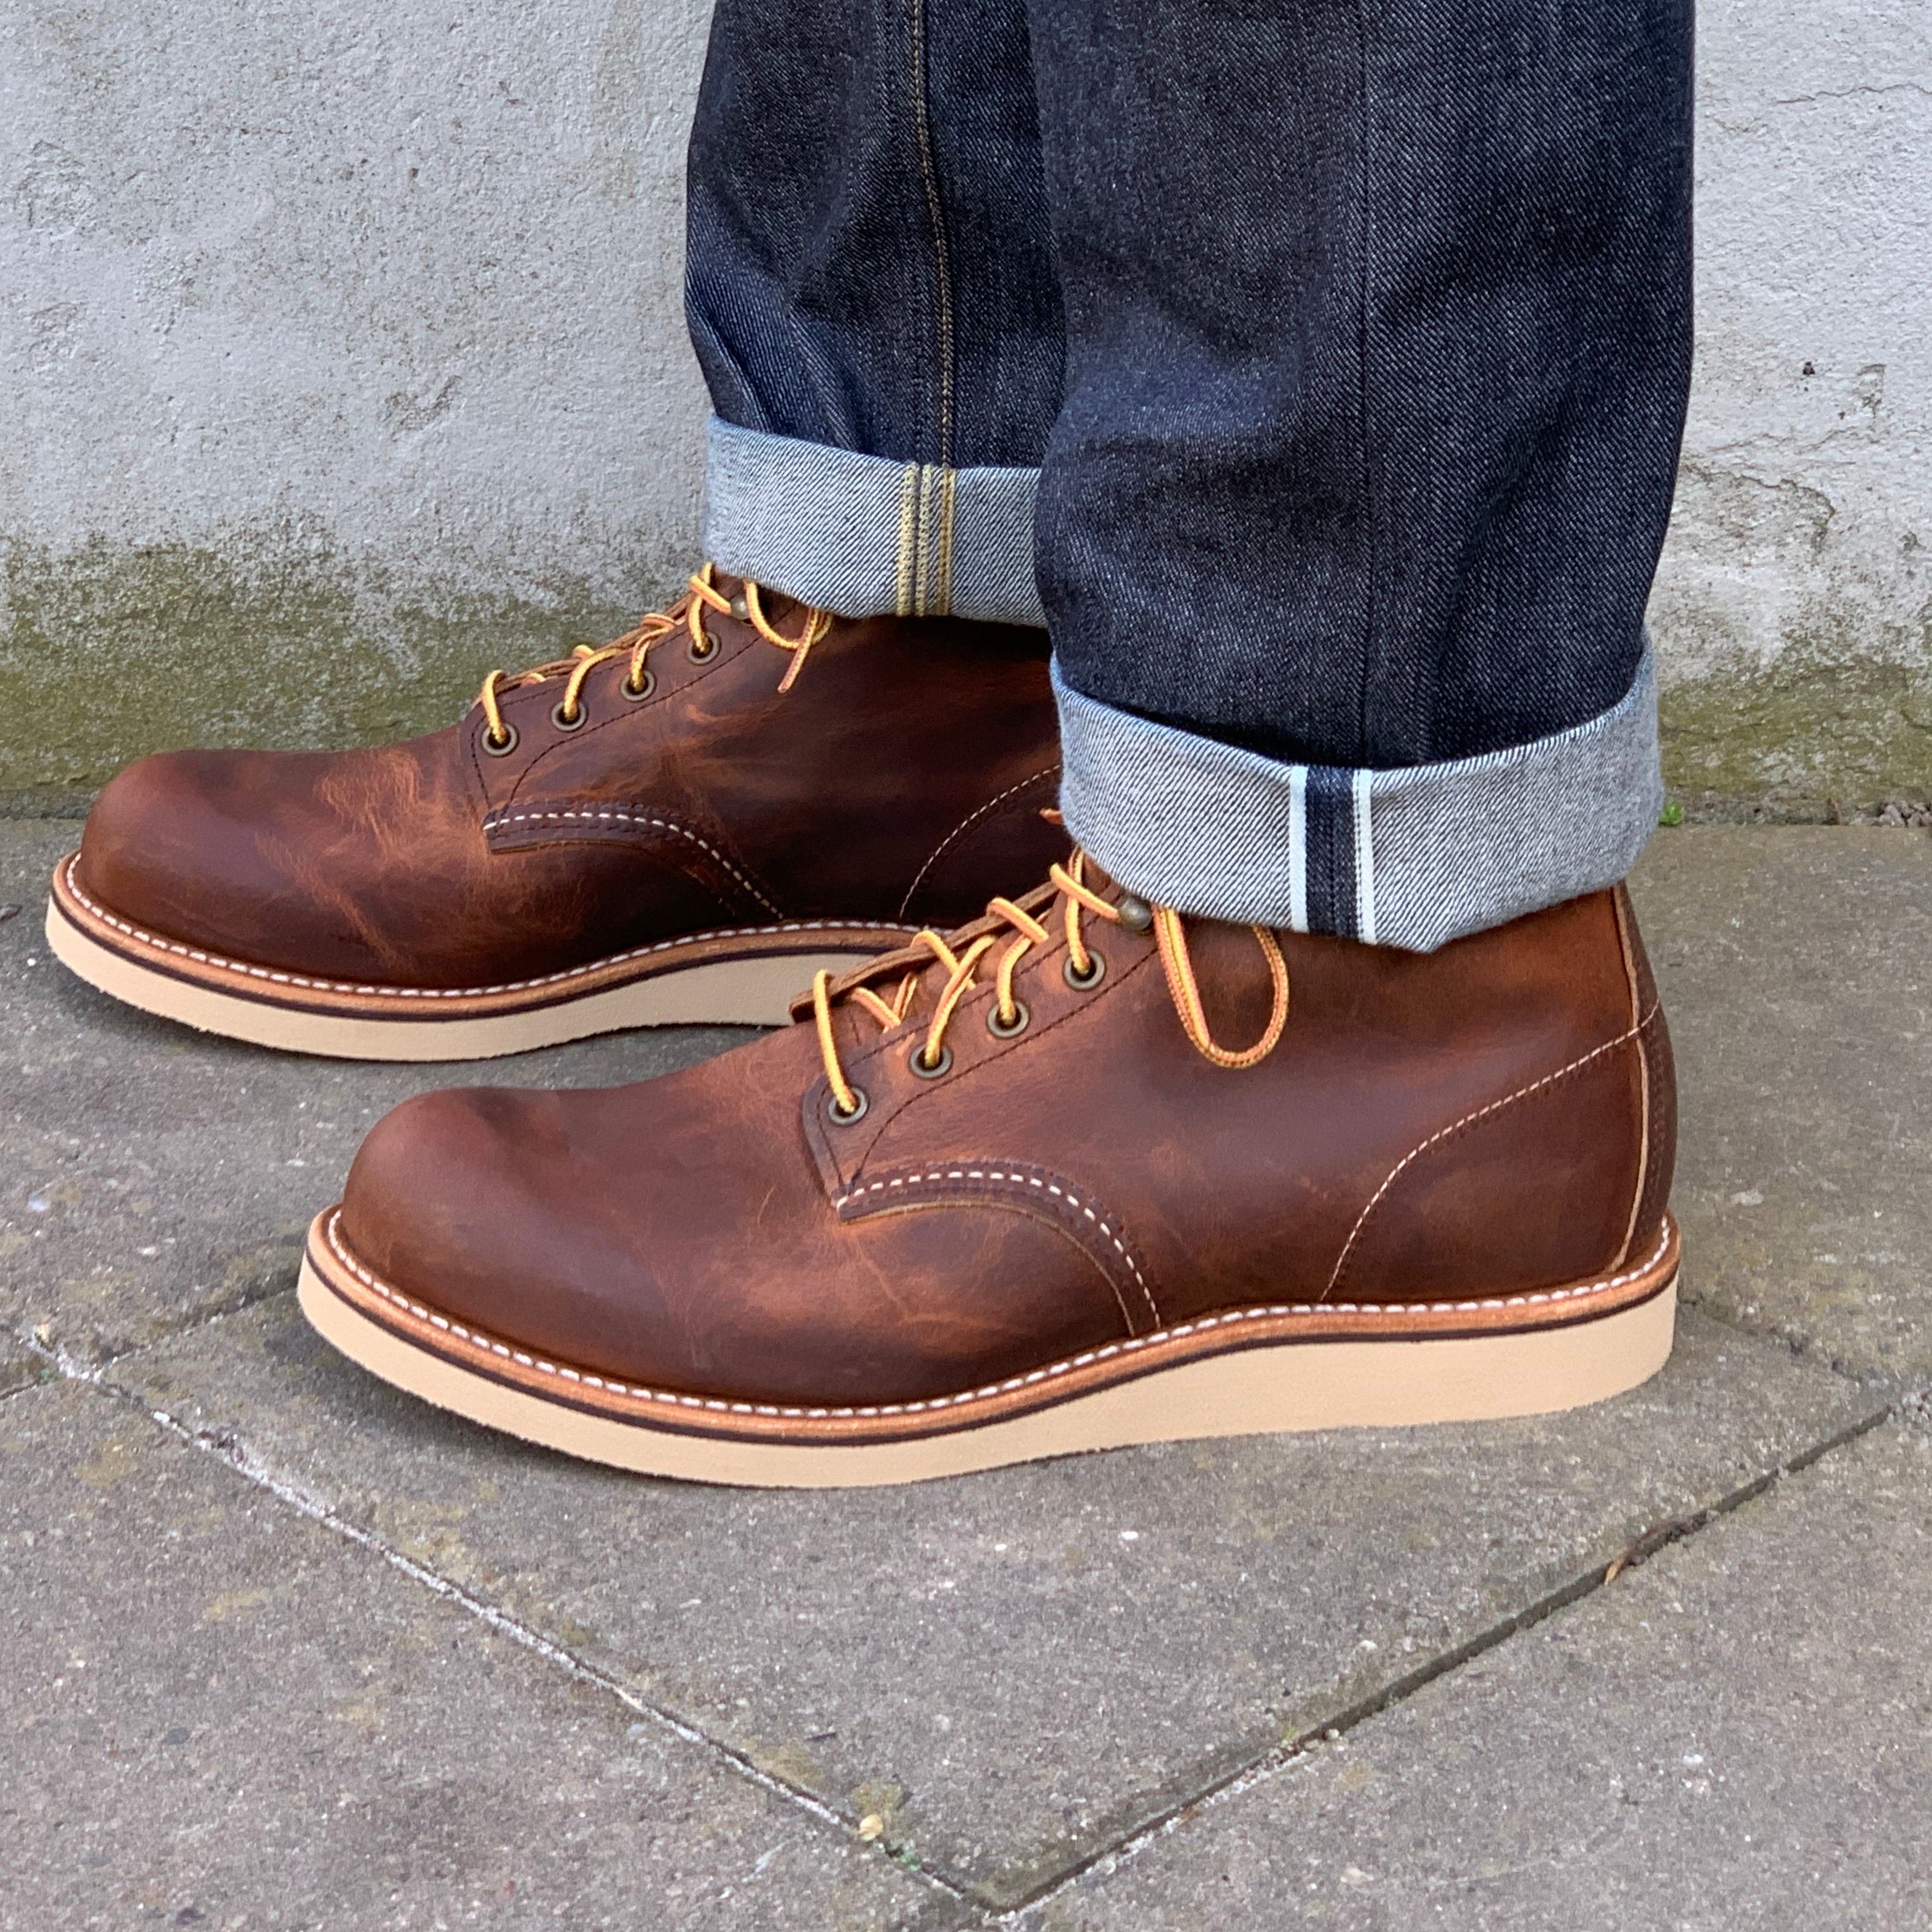 red wing boots rover